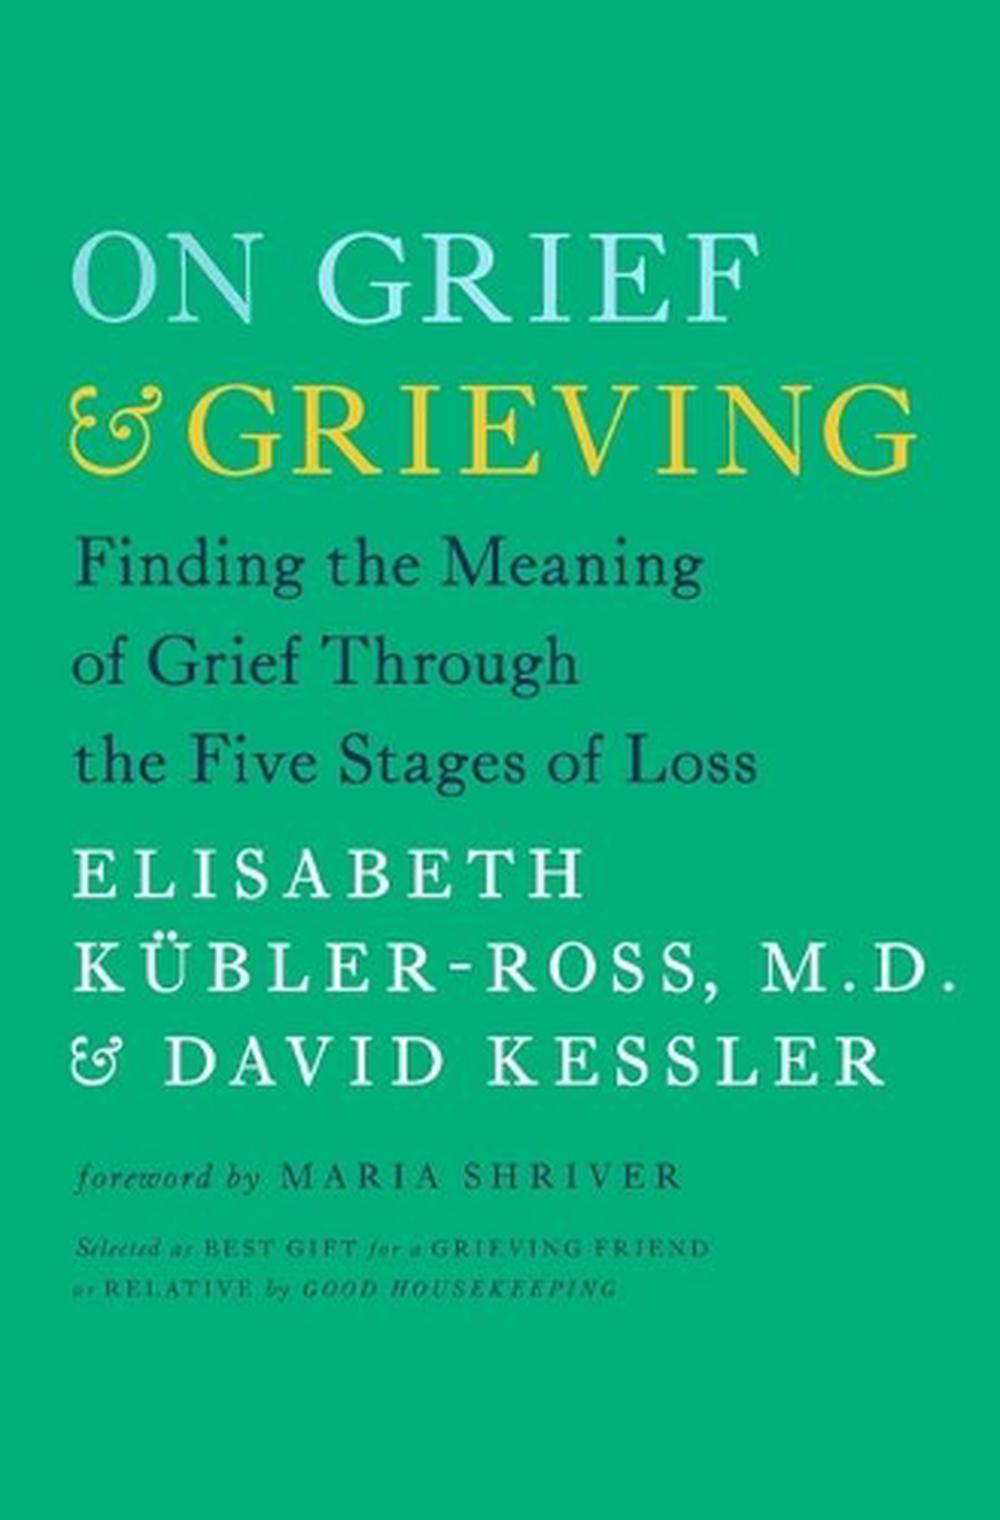 On Grief And Grieving Finding The Meaning Of Grief Through The Five Stages Of Loss By Elisabeth